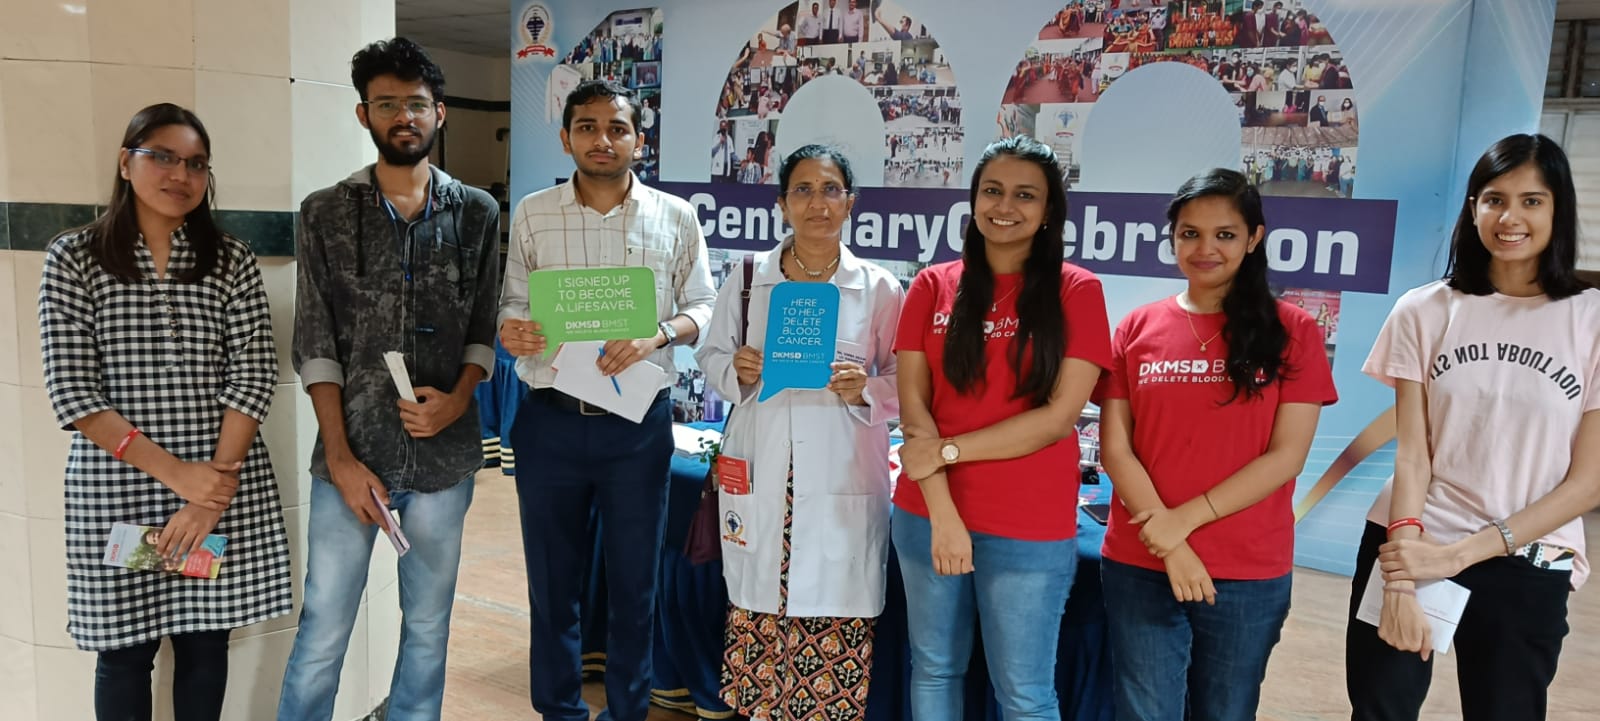 Over 500 Mumbai youth came forward to register as LifesaversThe registration drive was organised by DKMS BMST Foundation India